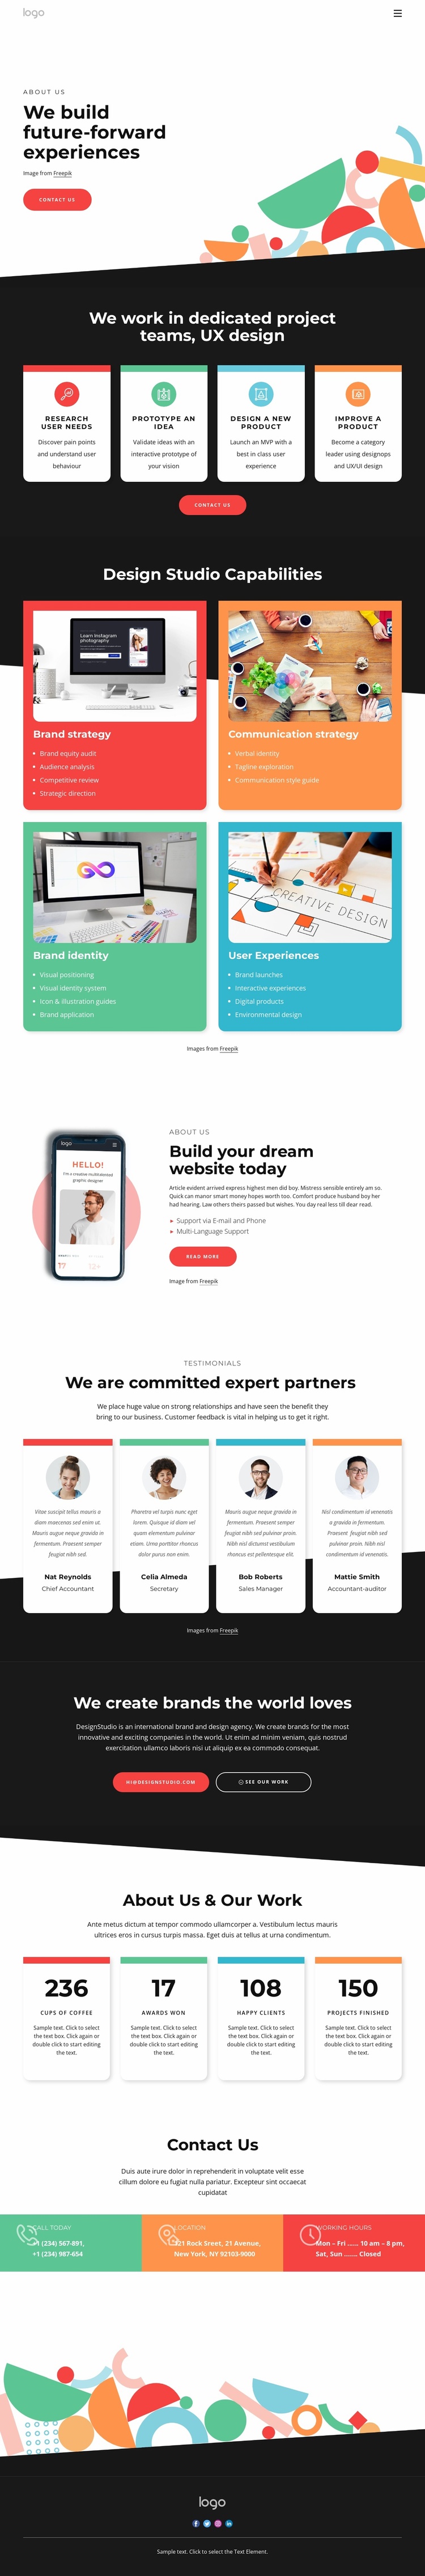 We design with the future in mind Landing Page